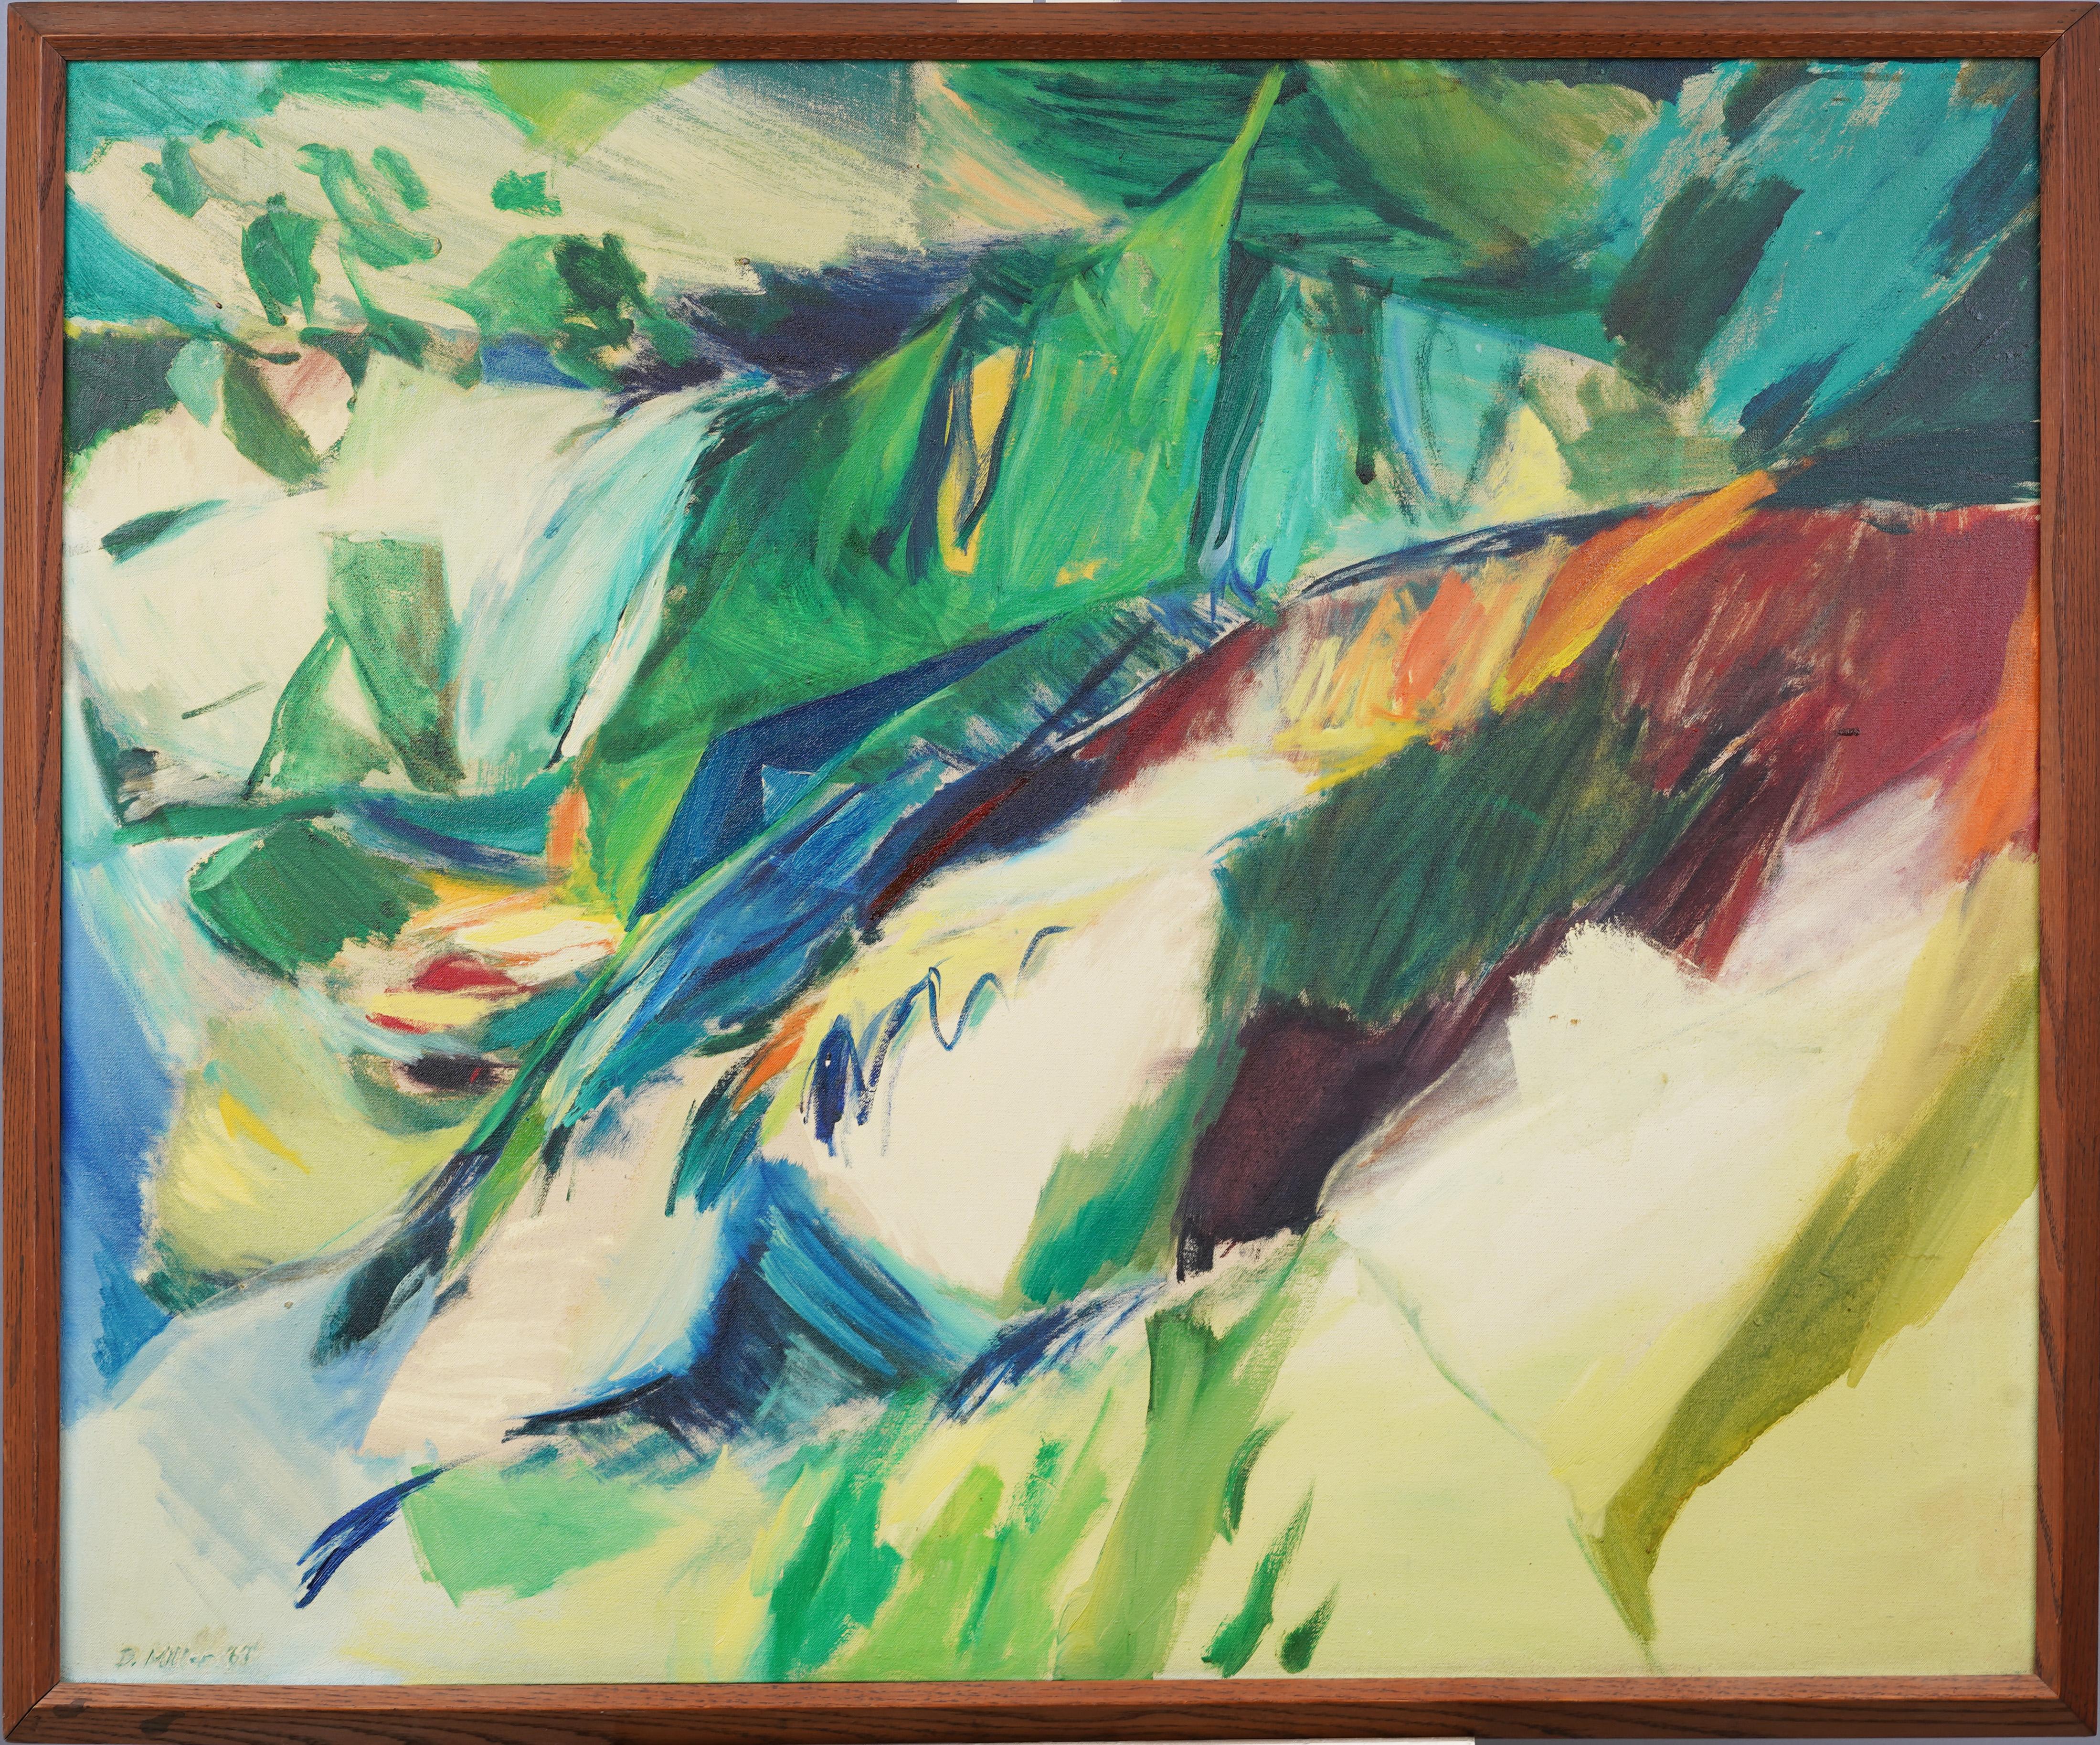 Very impressive signed 1967 abstract landscape.  Appears to be an abstract coastal scene. Framed.    